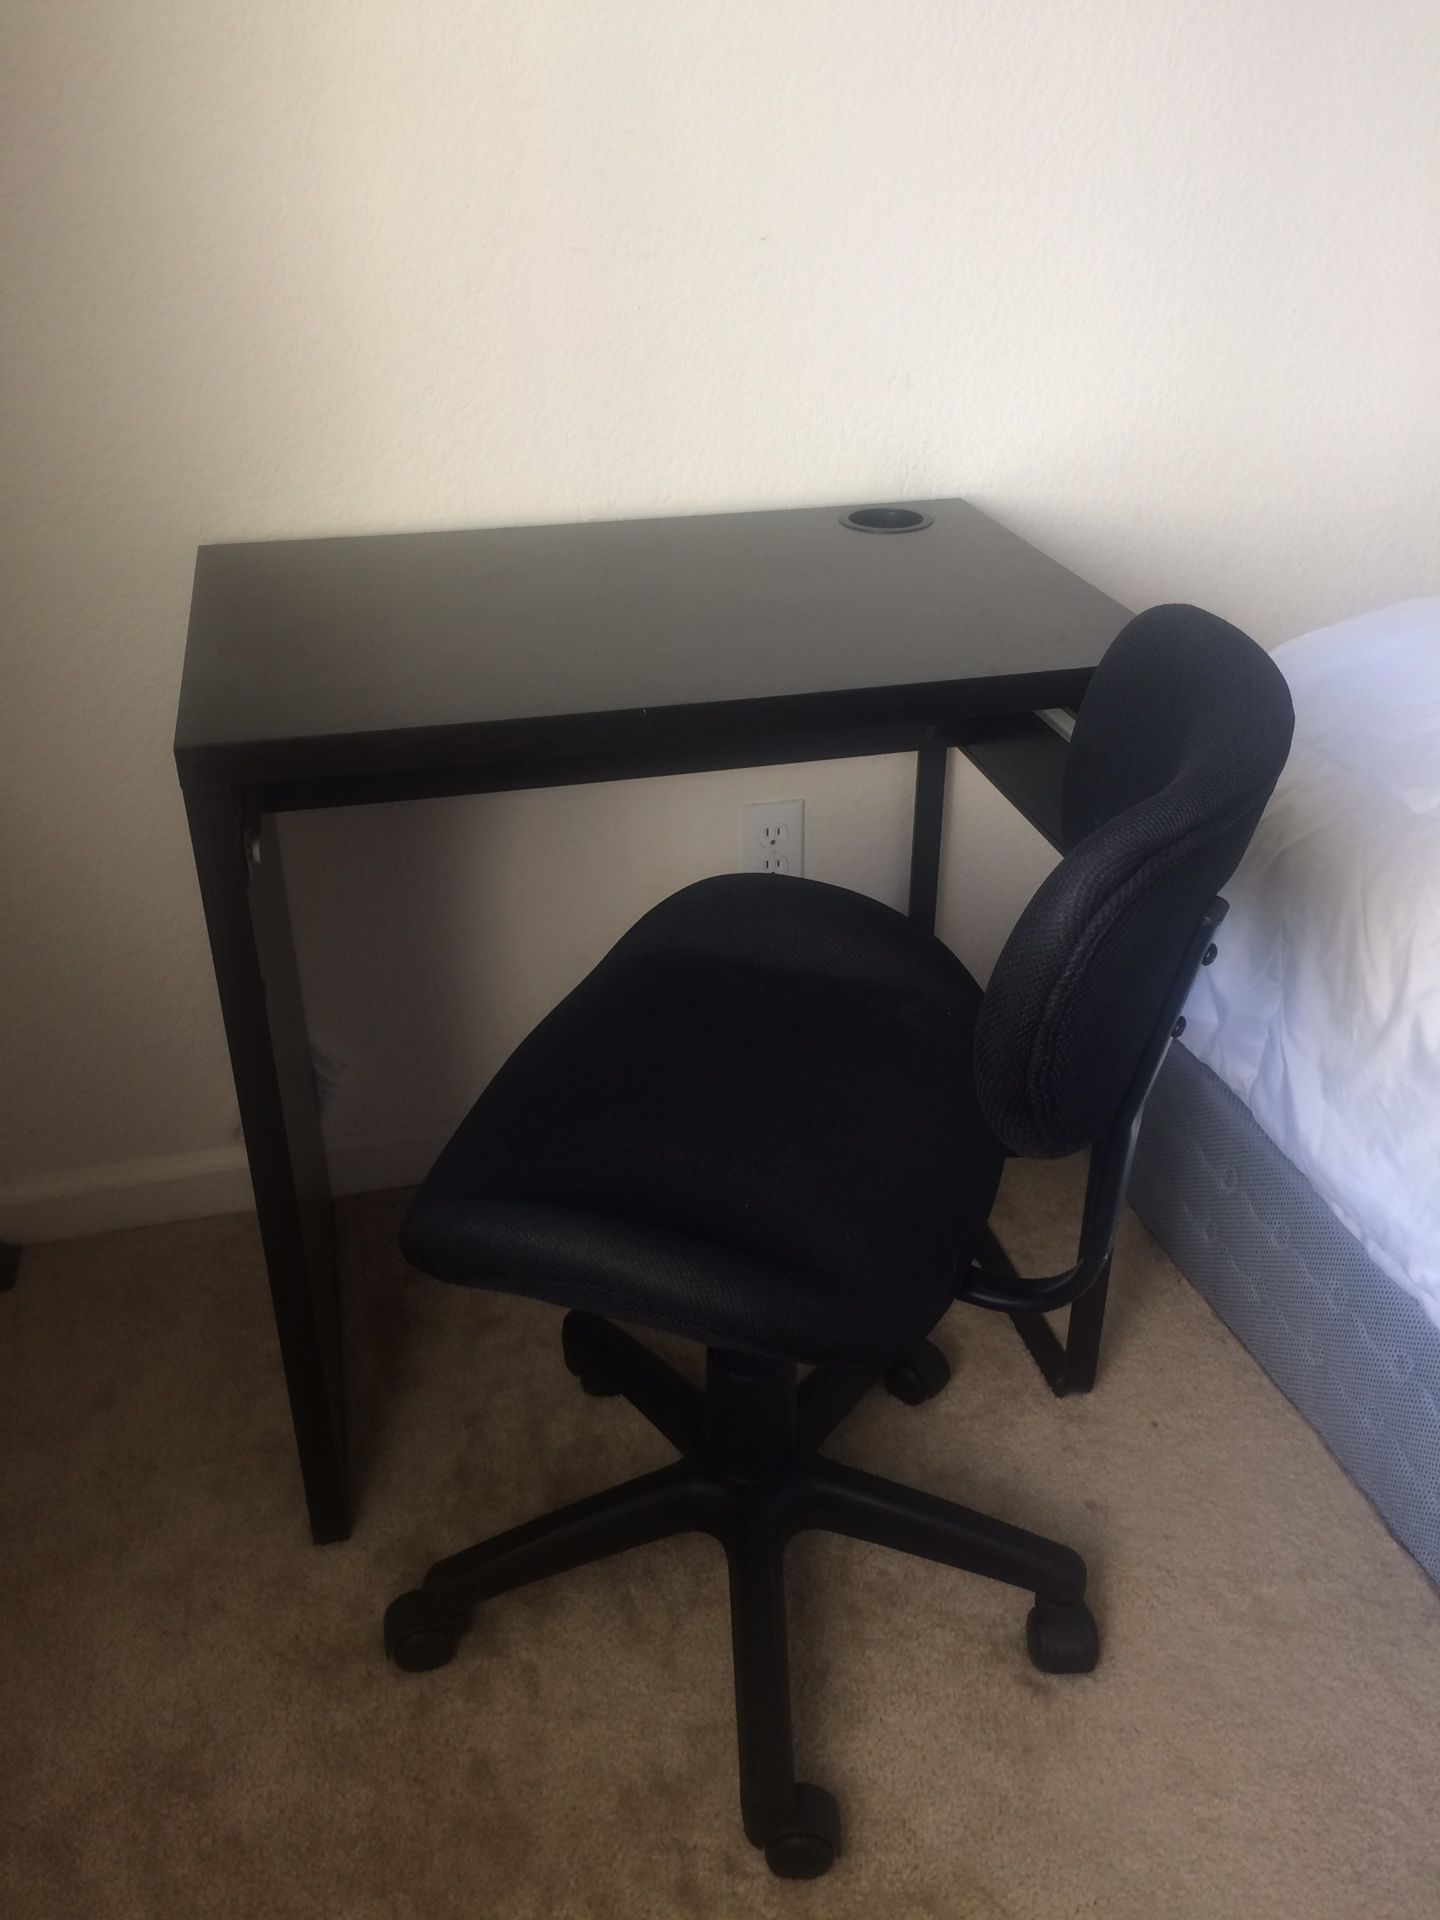 IKEA study desk and chair